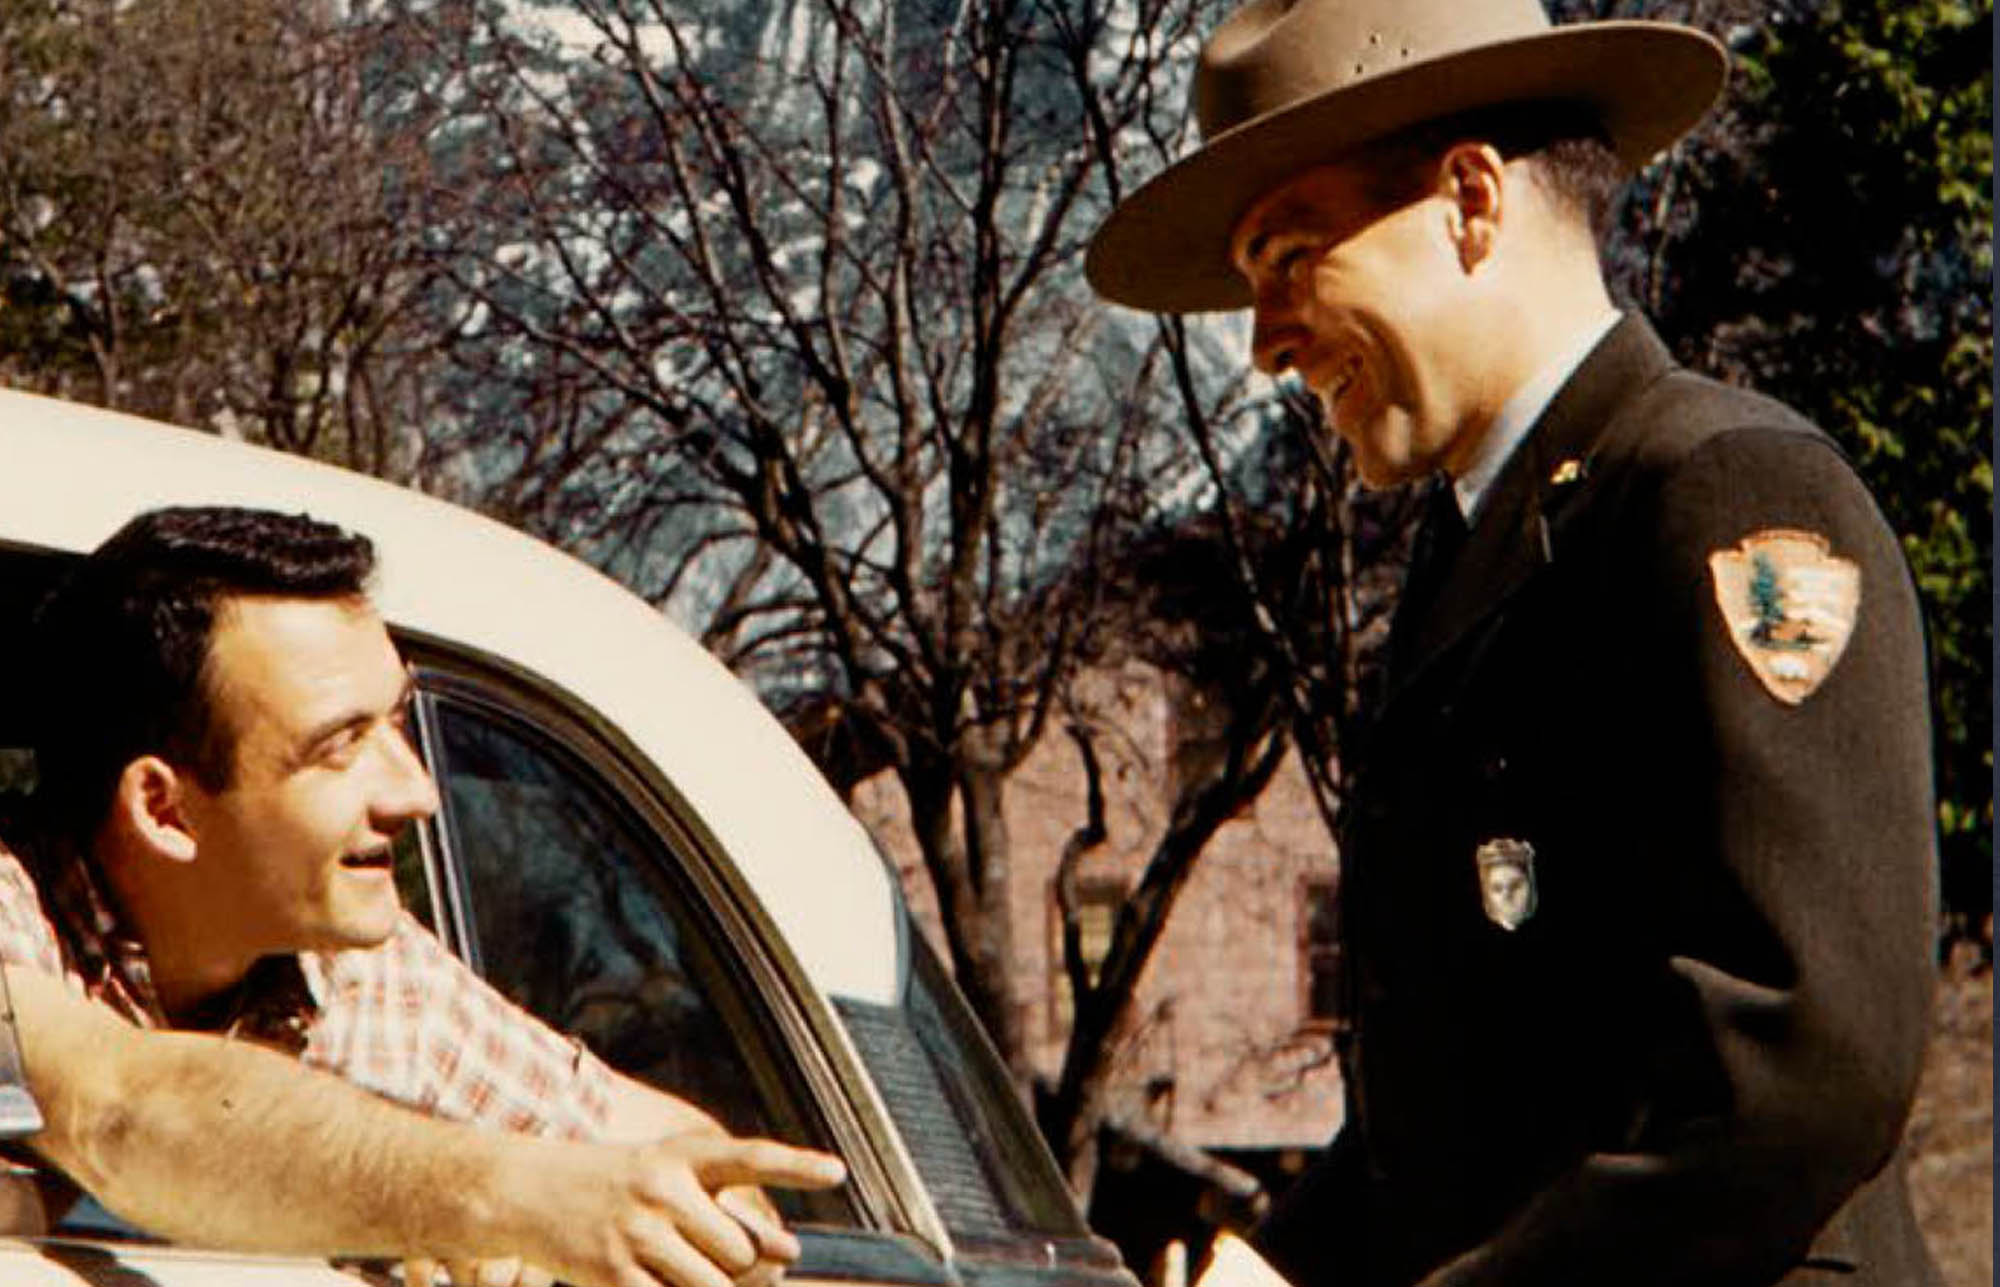 Man in an NPS uniform with broad brim hat and a silver shield shaped badge talks to a man leaning out of a car window.